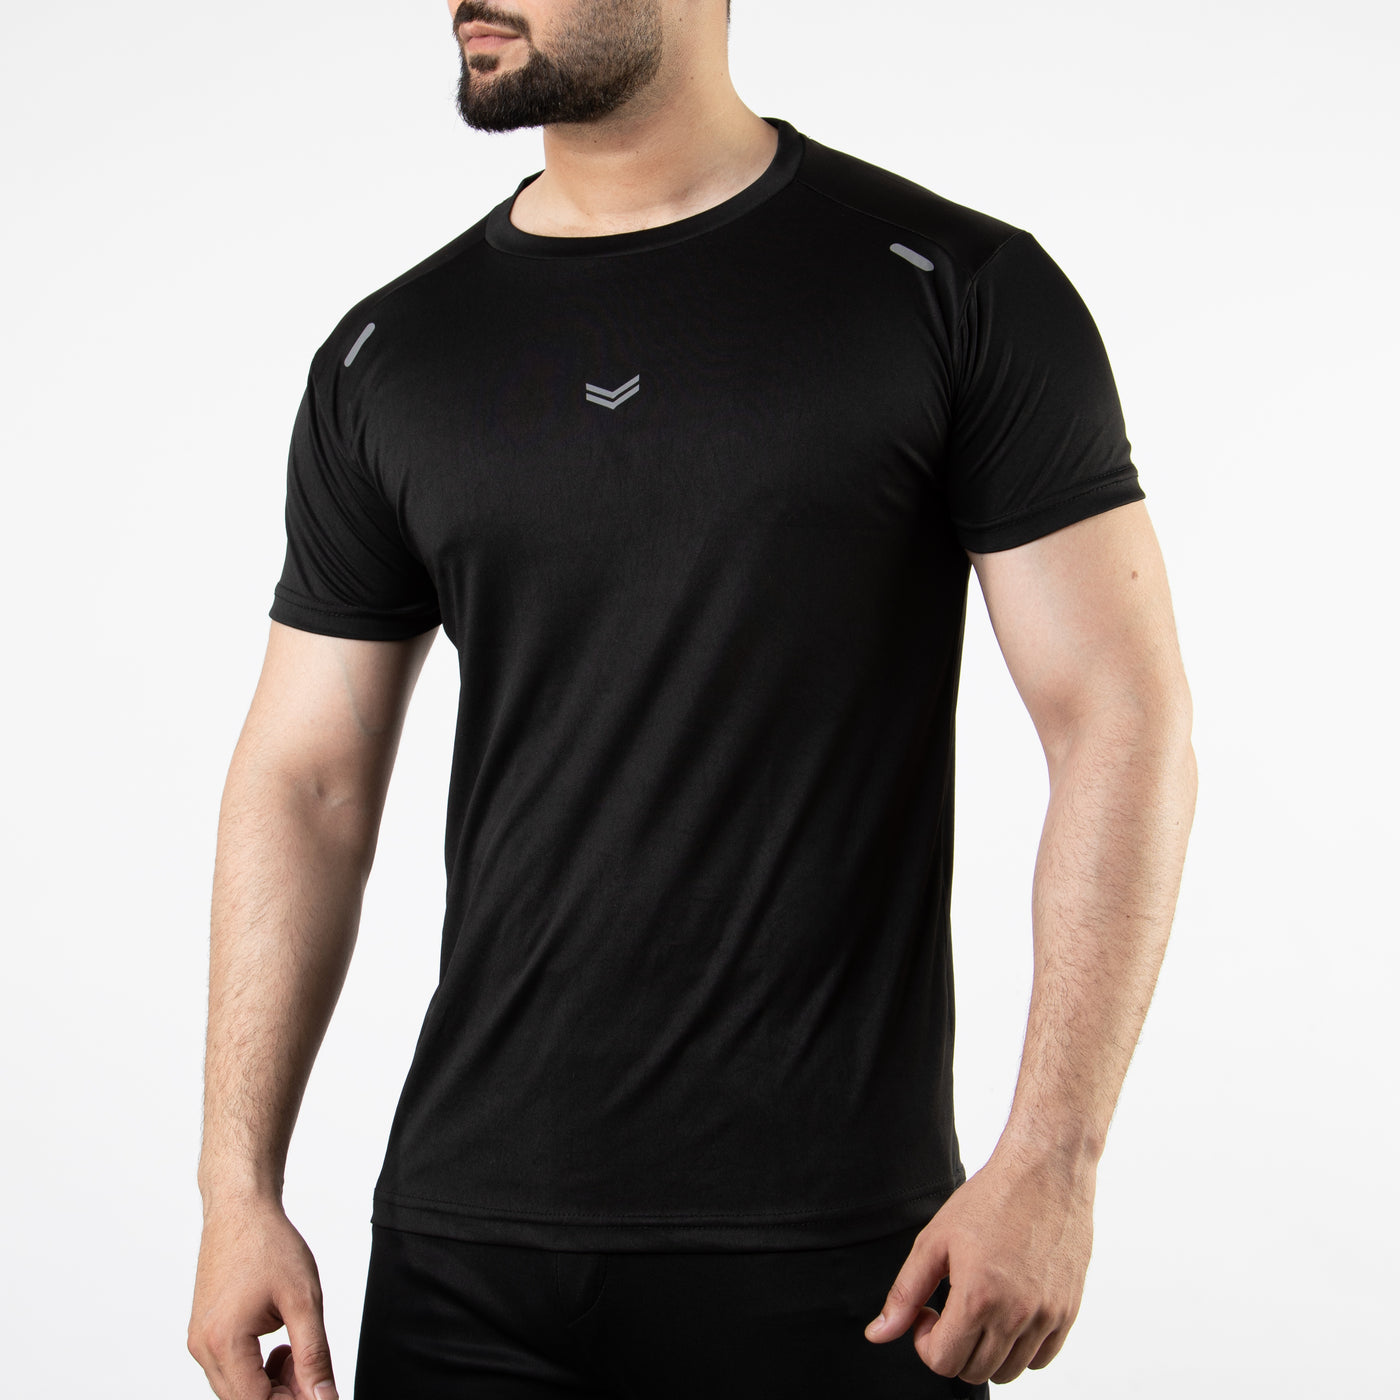 Black Quick Dry T-Shirt with Small Front Reflectors